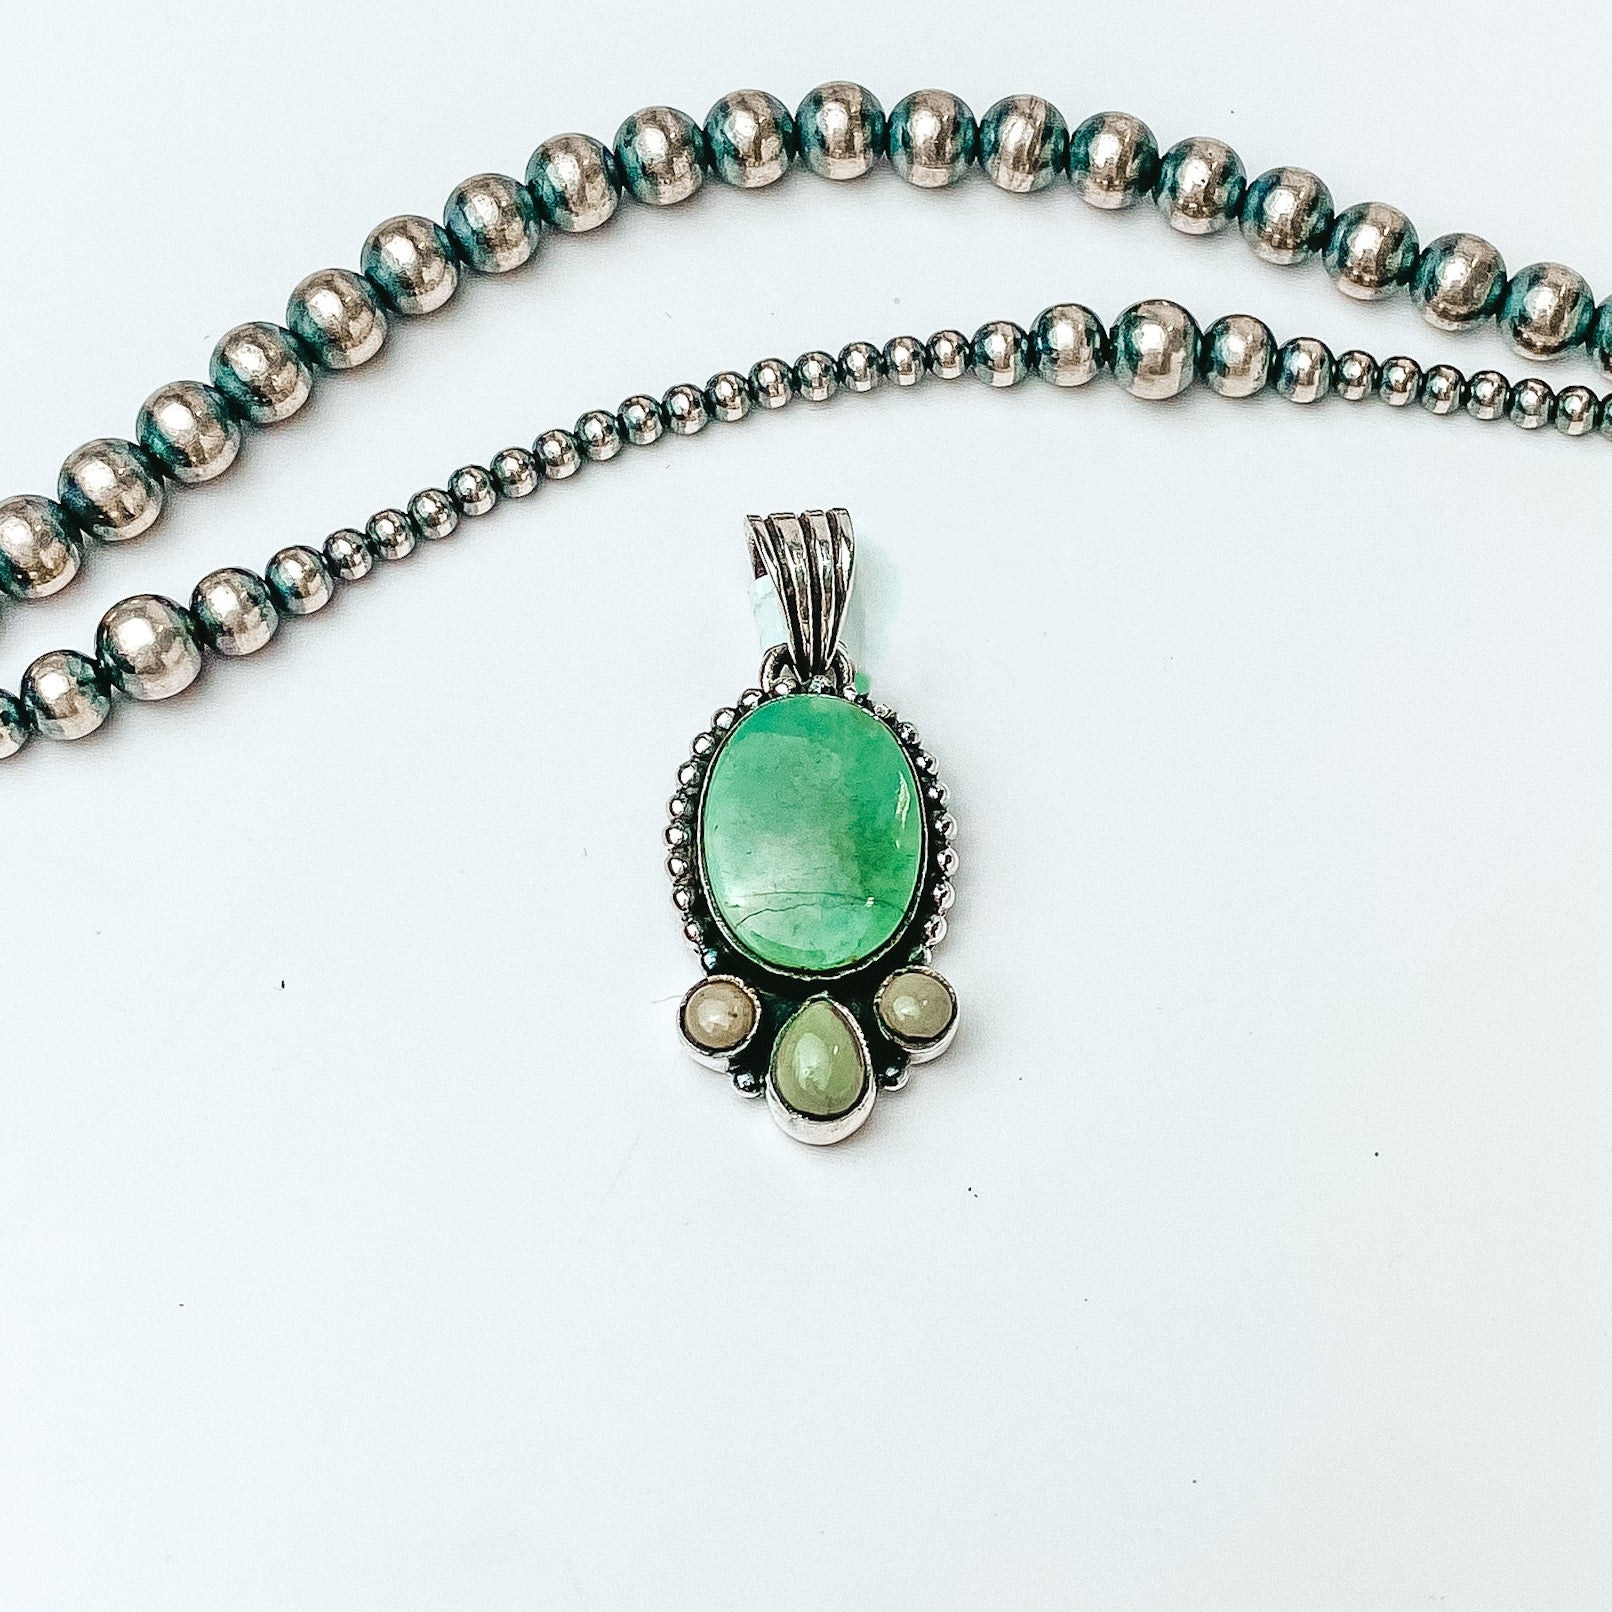 Centered in the picture is a turquoise round pendant with three accent stones on the bottom. Navajo pearls are laid above the pendant, all on a white background. 